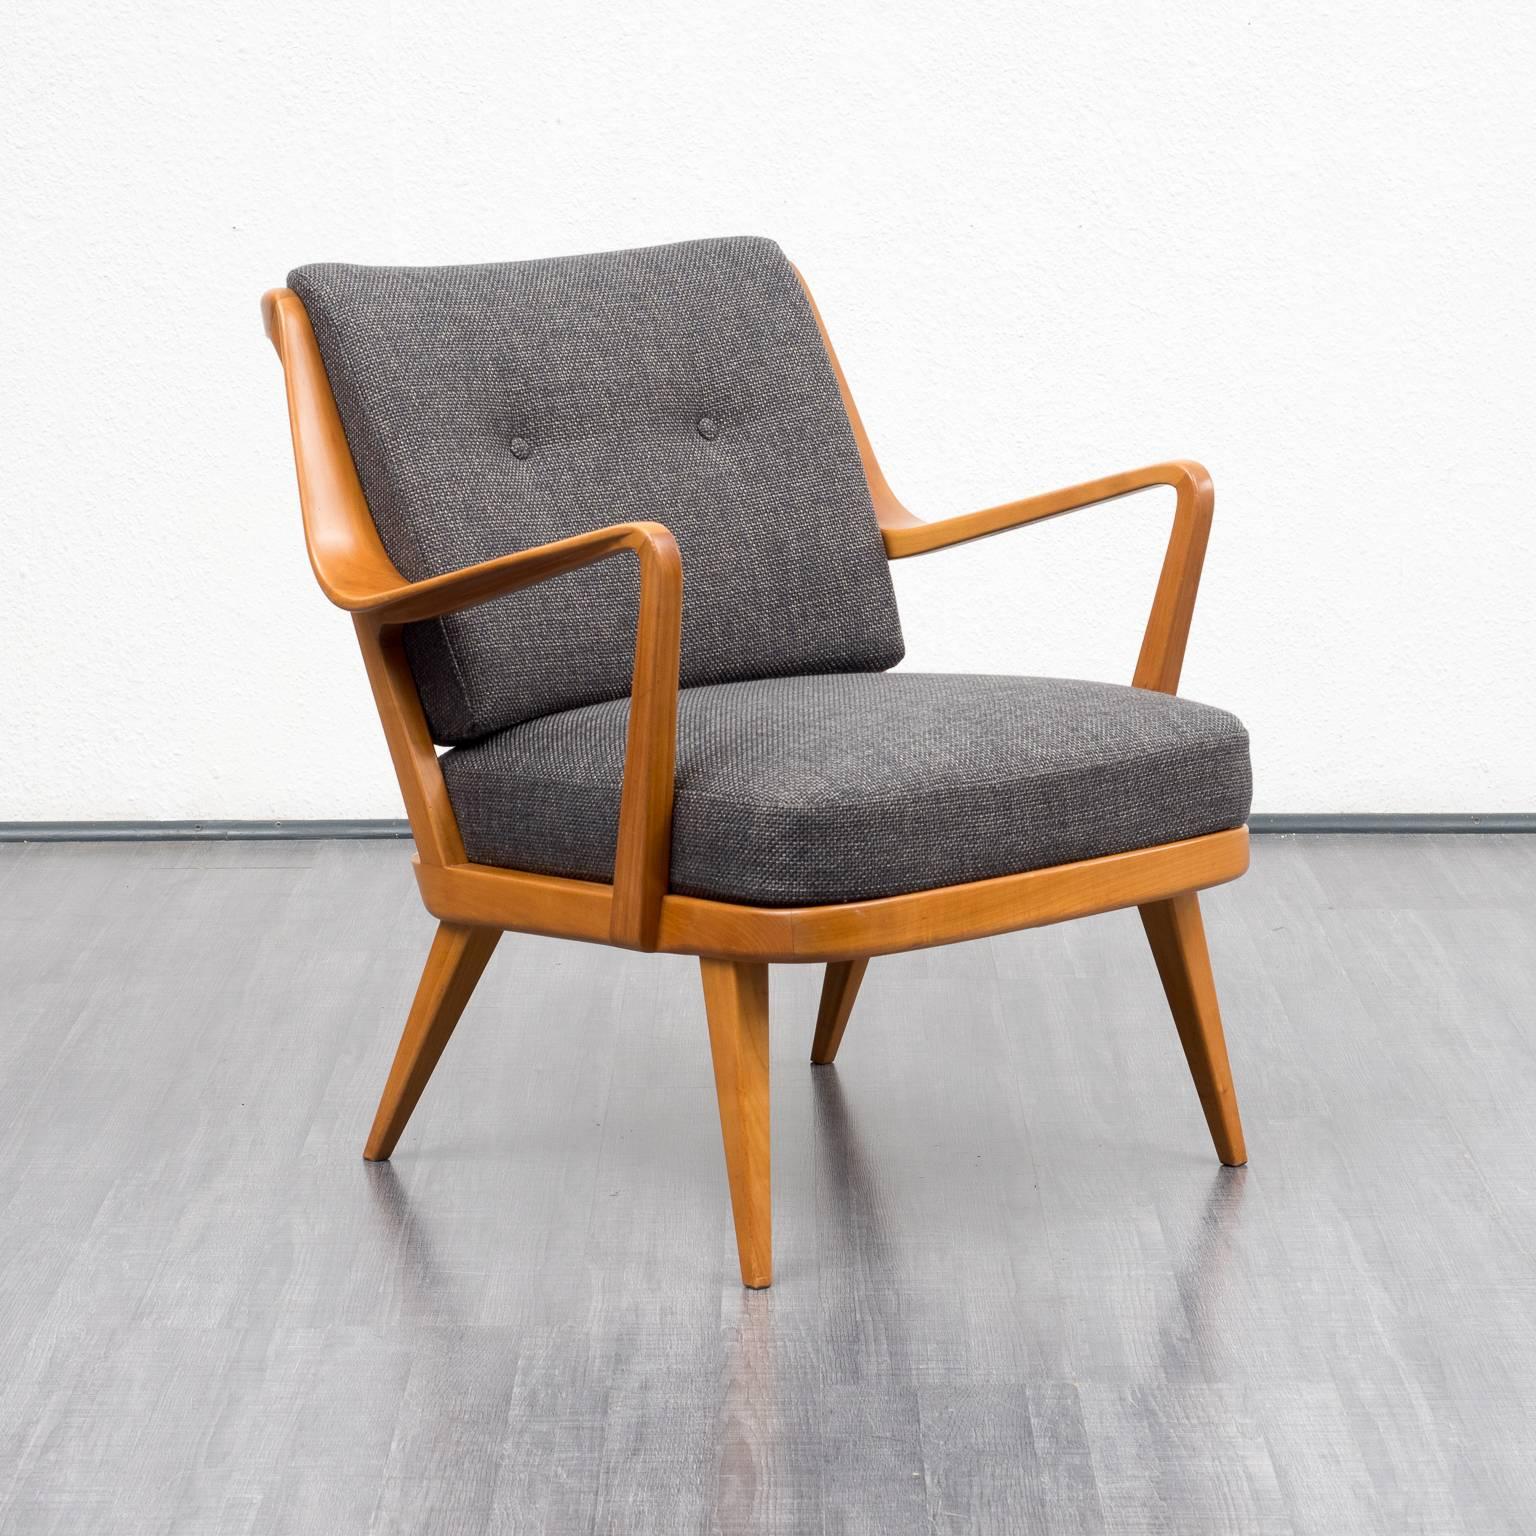 Beautiful, Classic armchair from the 1950s by Knoll Antimott. Solid cherrywood frame with shapely armrests. Very comfortable due to the innerspring seating cushions. The armchair was professionally upholstered and covered with a high-quality,